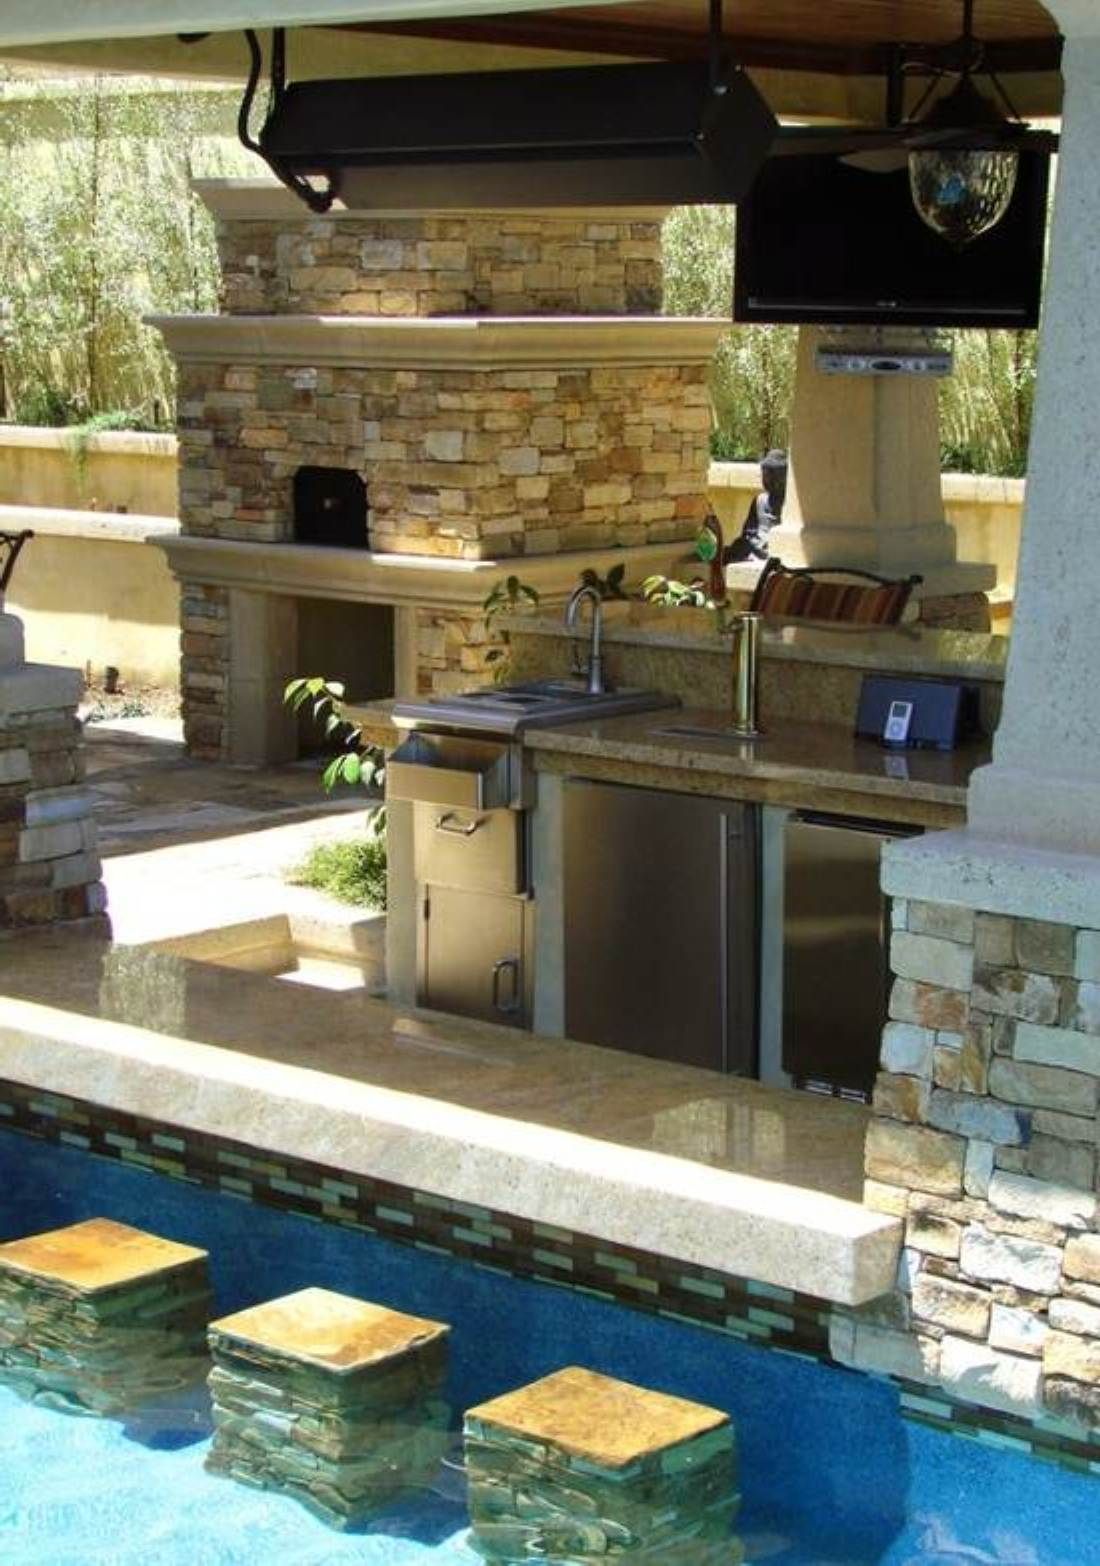 Kick-ass Swimming Pool Bar. Sorry, current occupants of this home — were moving in and kicking you out!